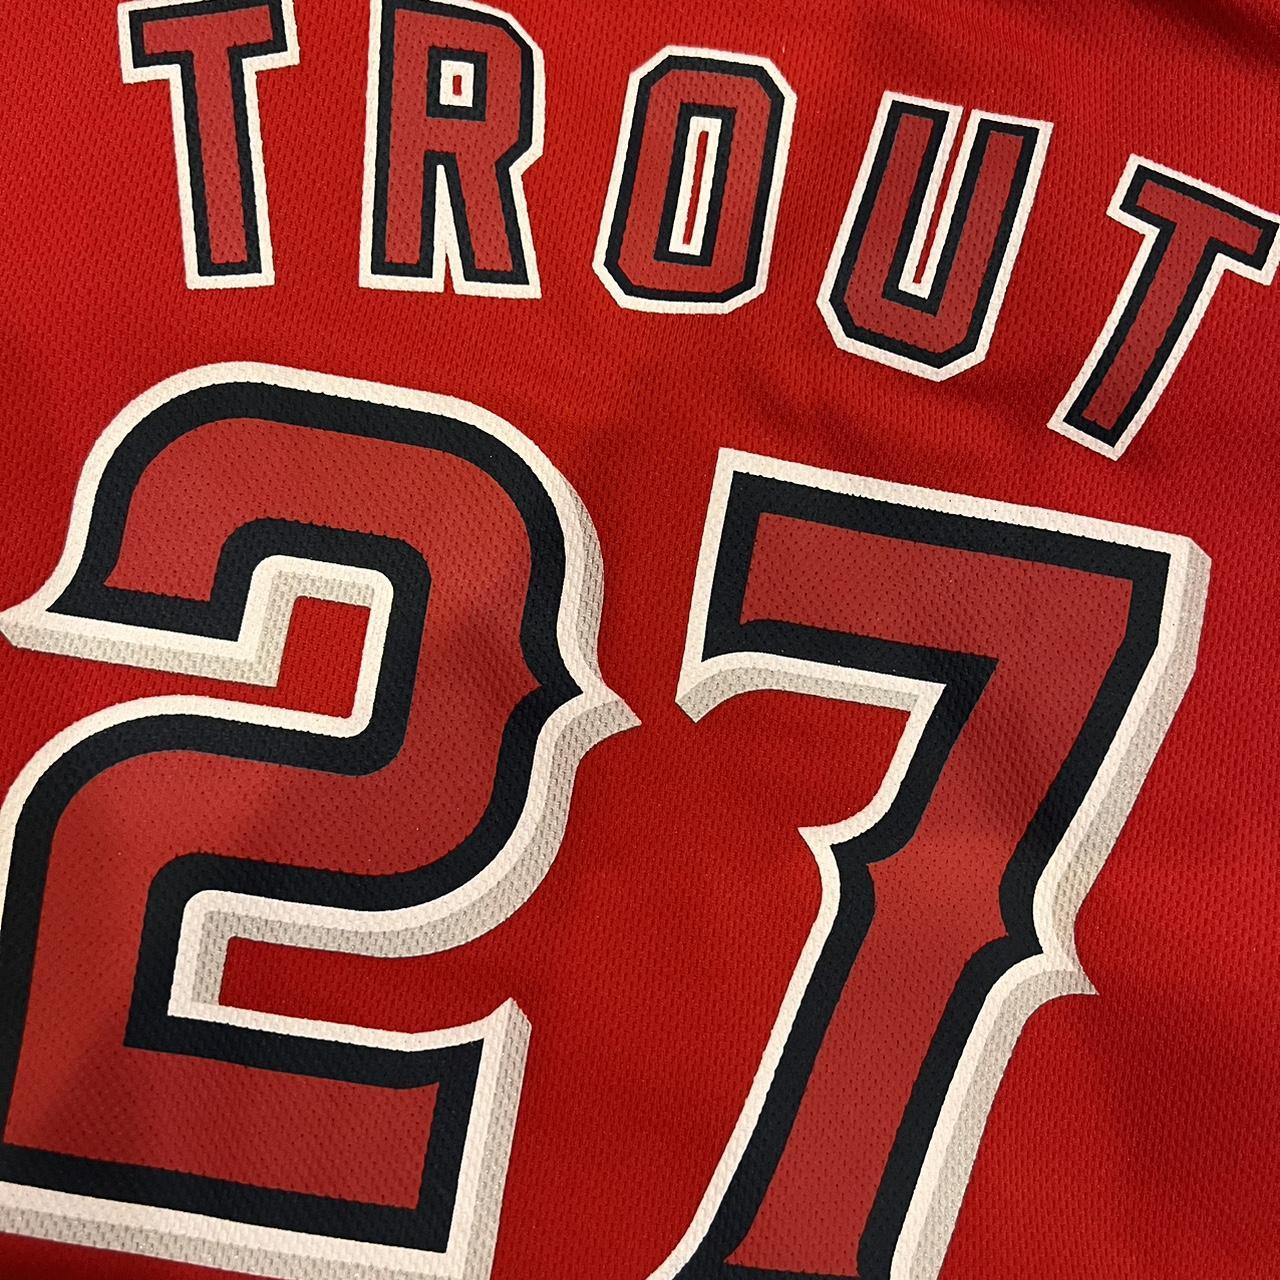 ANGELS BASEBALL JERSEY MIKE TROUT JERSEY YOUTH XL, - Depop